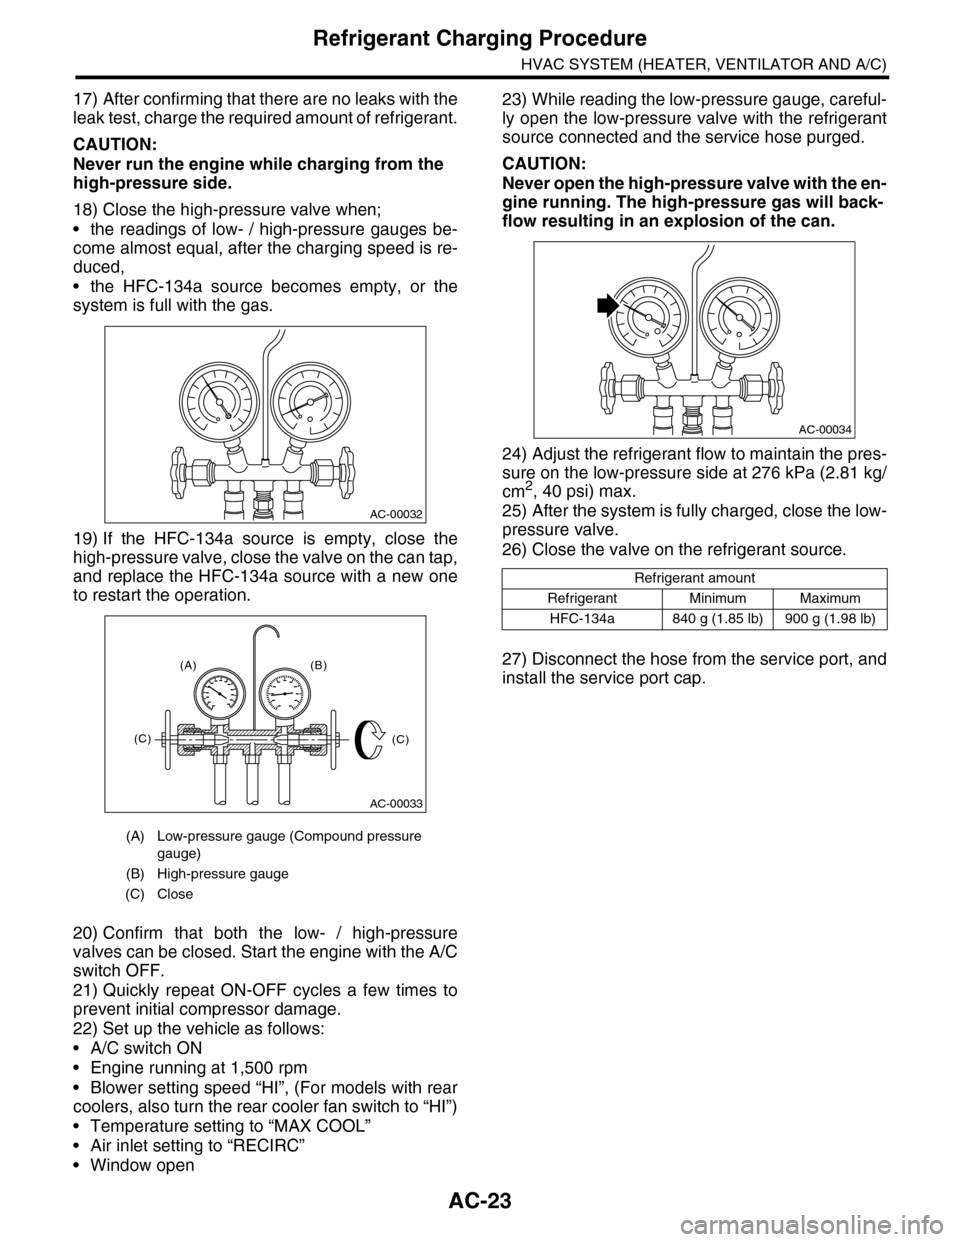 SUBARU TRIBECA 2009 1.G Service Workshop Manual AC-23
Refrigerant Charging Procedure
HVAC SYSTEM (HEATER, VENTILATOR AND A/C)
17) After confirming that there are no leaks with the
leak test, charge the required amount of refrigerant.
CAUTION:
Never